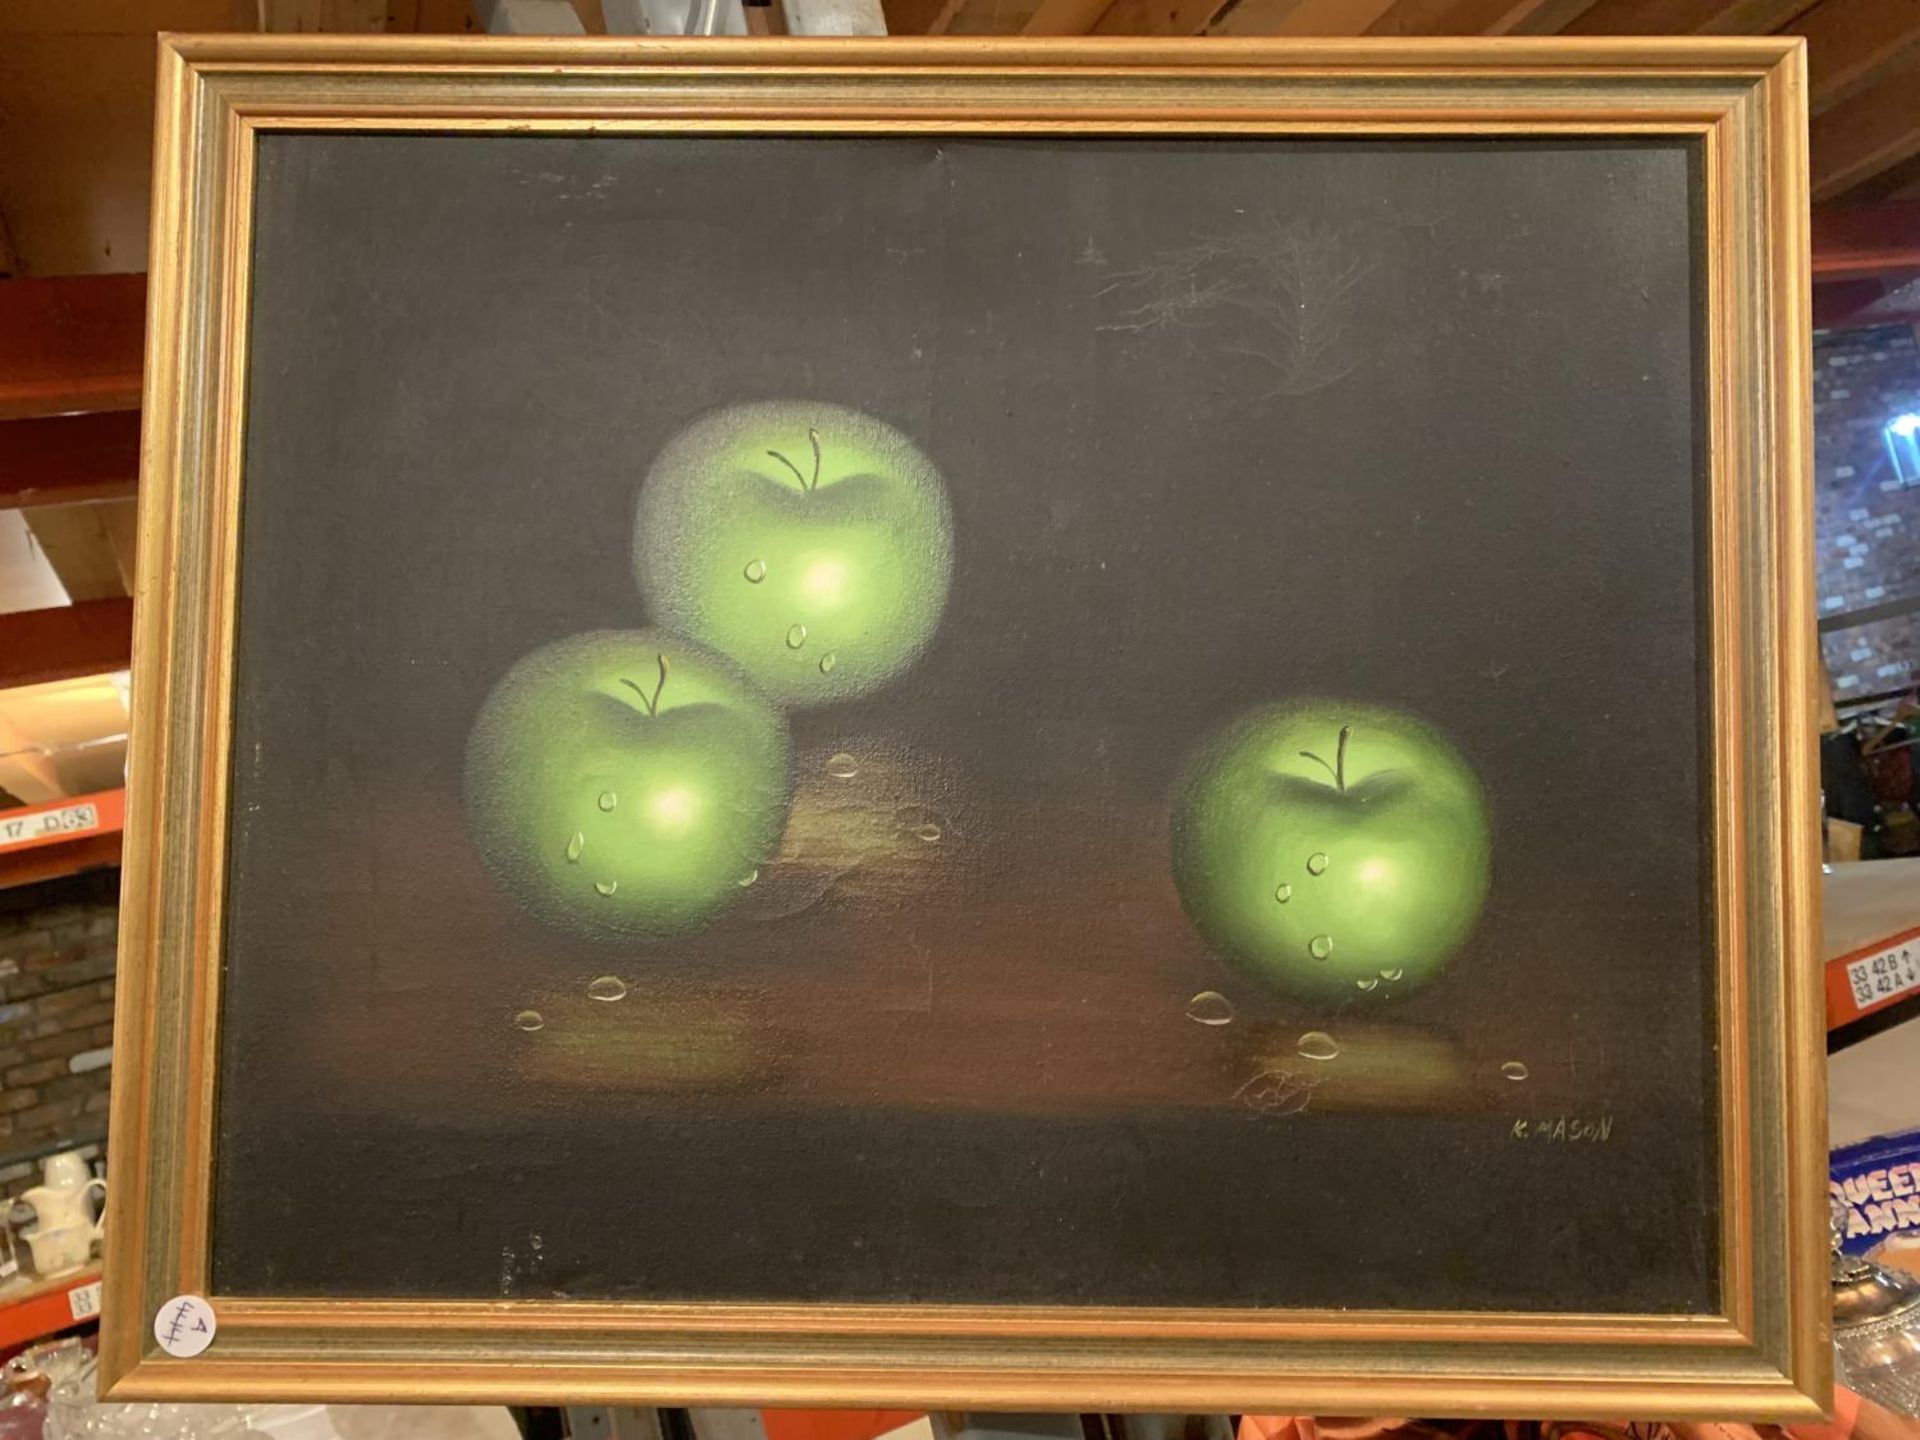 A FRAMED STILL LIFE PAINTING ON CANVAS OF APPLES AGAINST A BLACK BACKGROUND